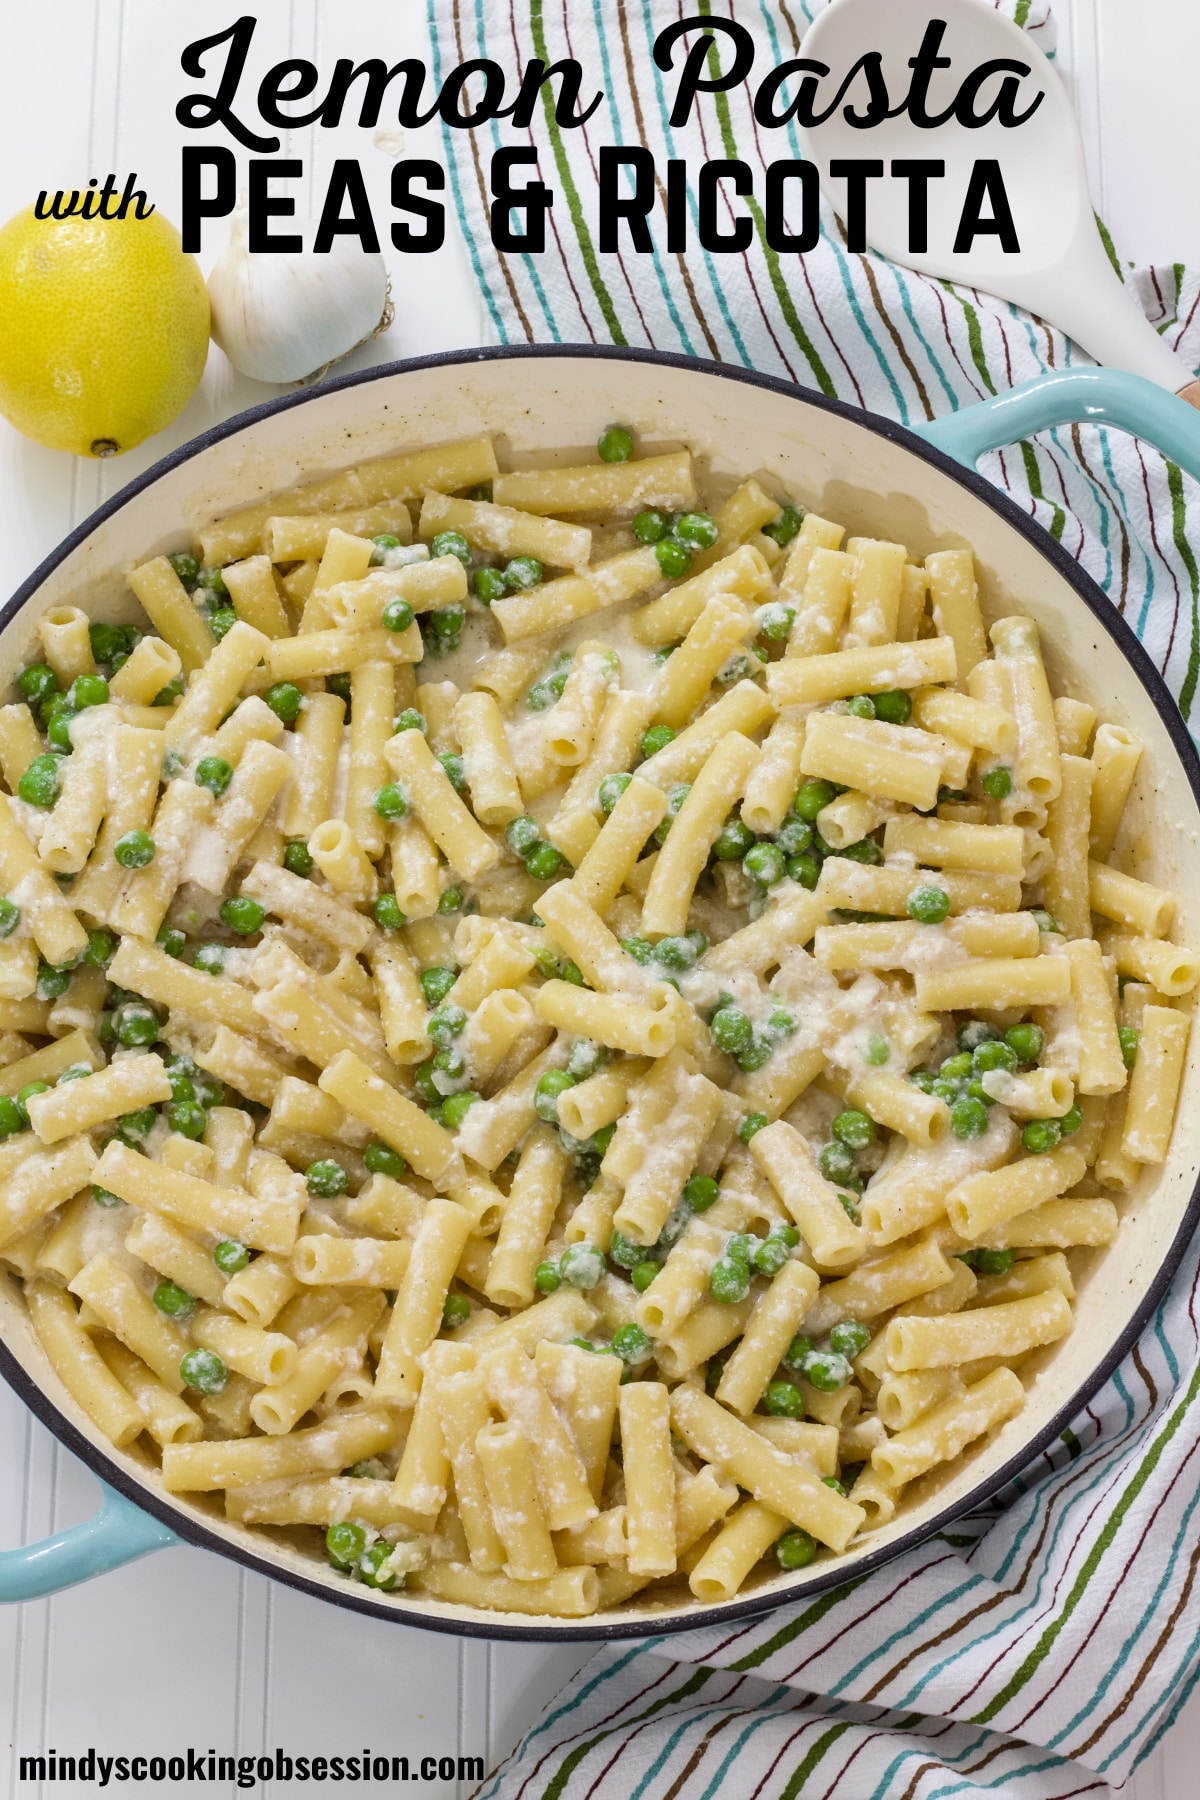 Easy Lemon Pasta with Peas and Ricotta Recipe is a meatless dish that is ready in about 30 minutes and perfect for any night of the week! via @mindyscookingobsession